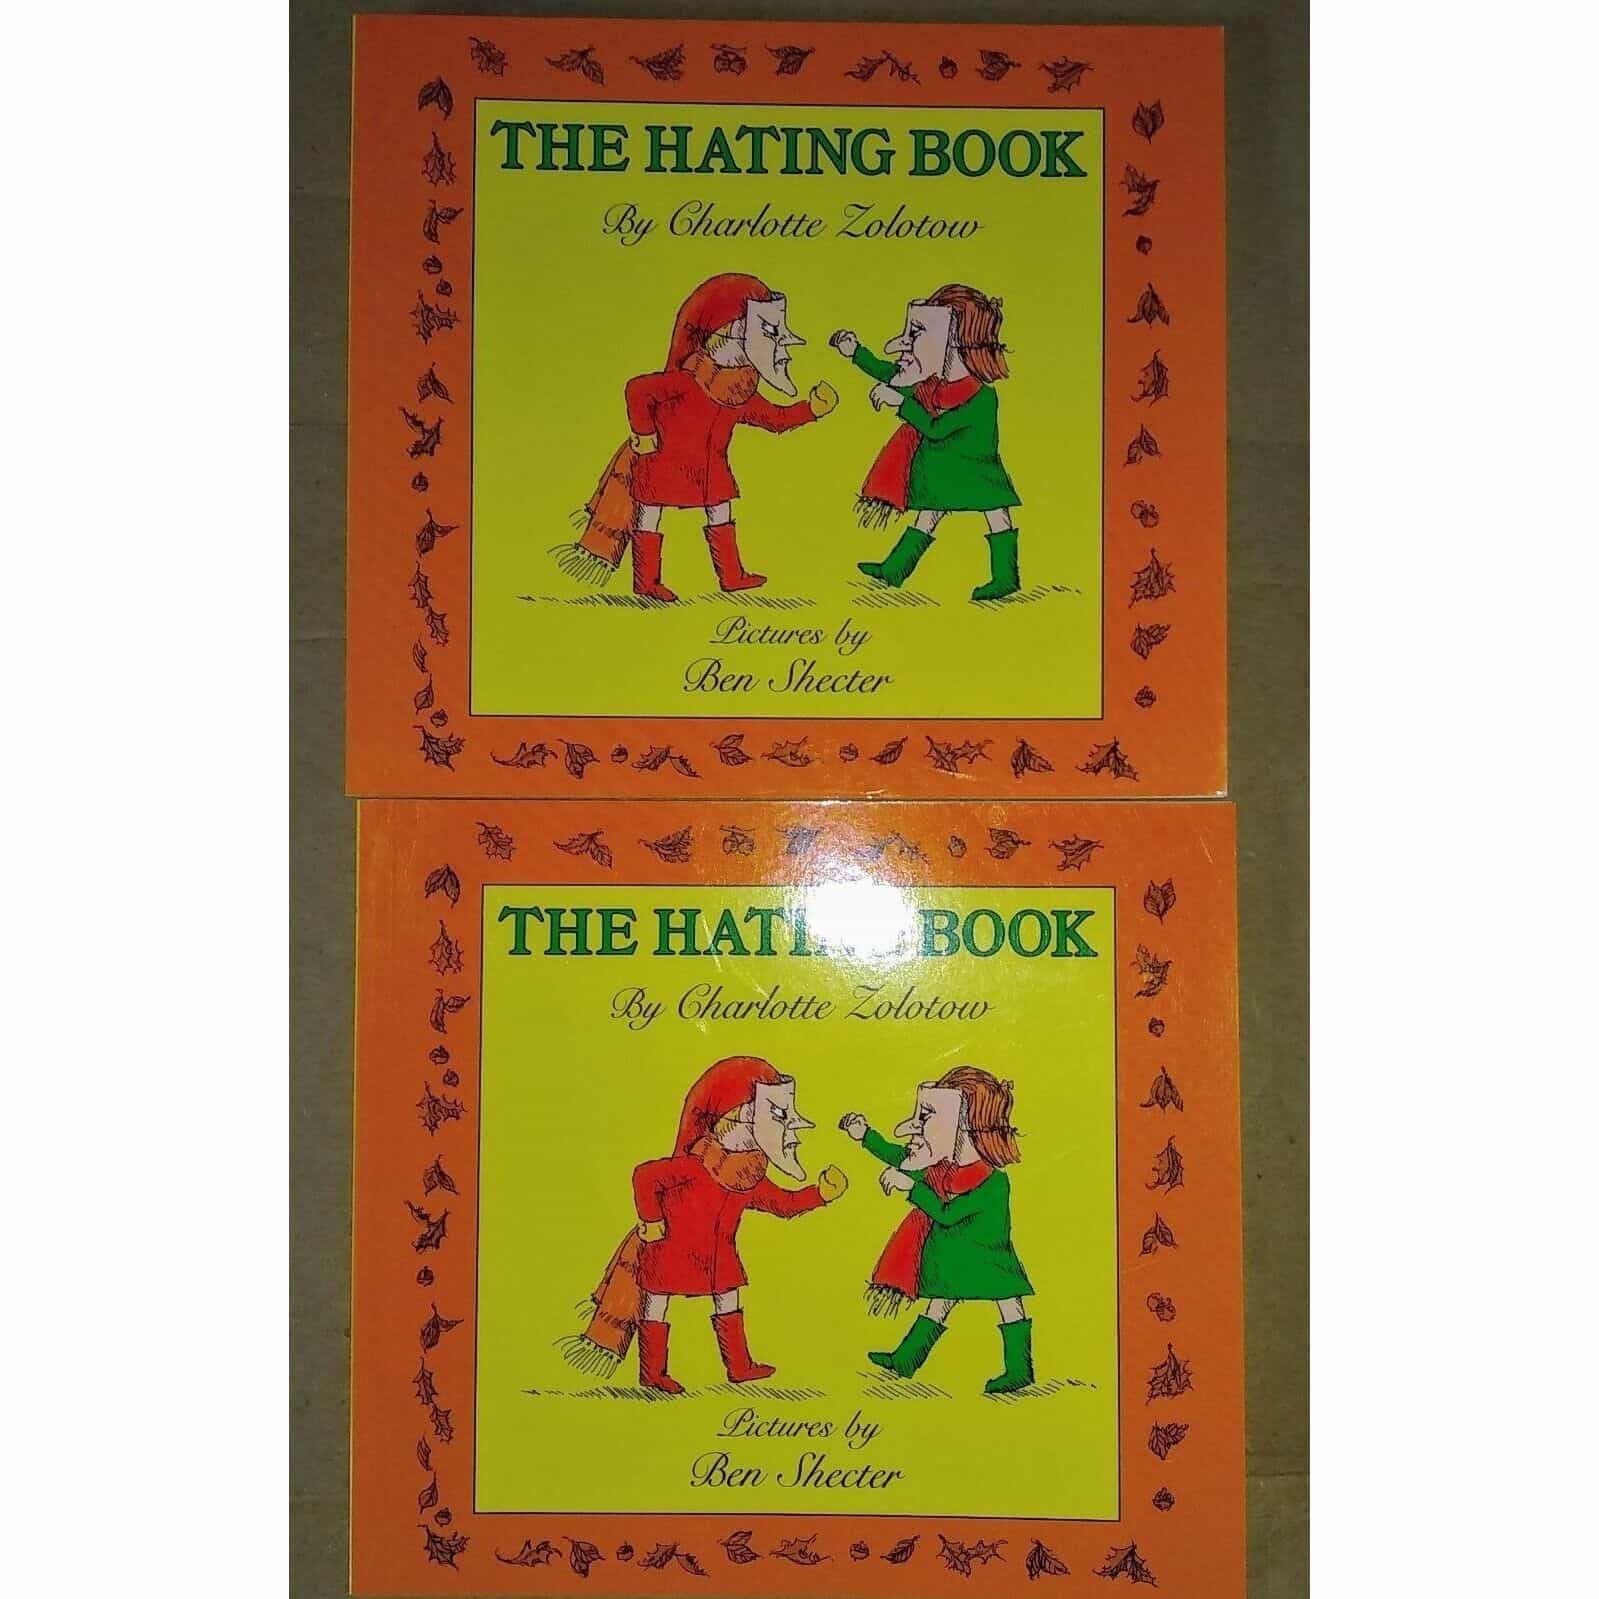 The Hating Book by Charlotte Zolotow (x2)